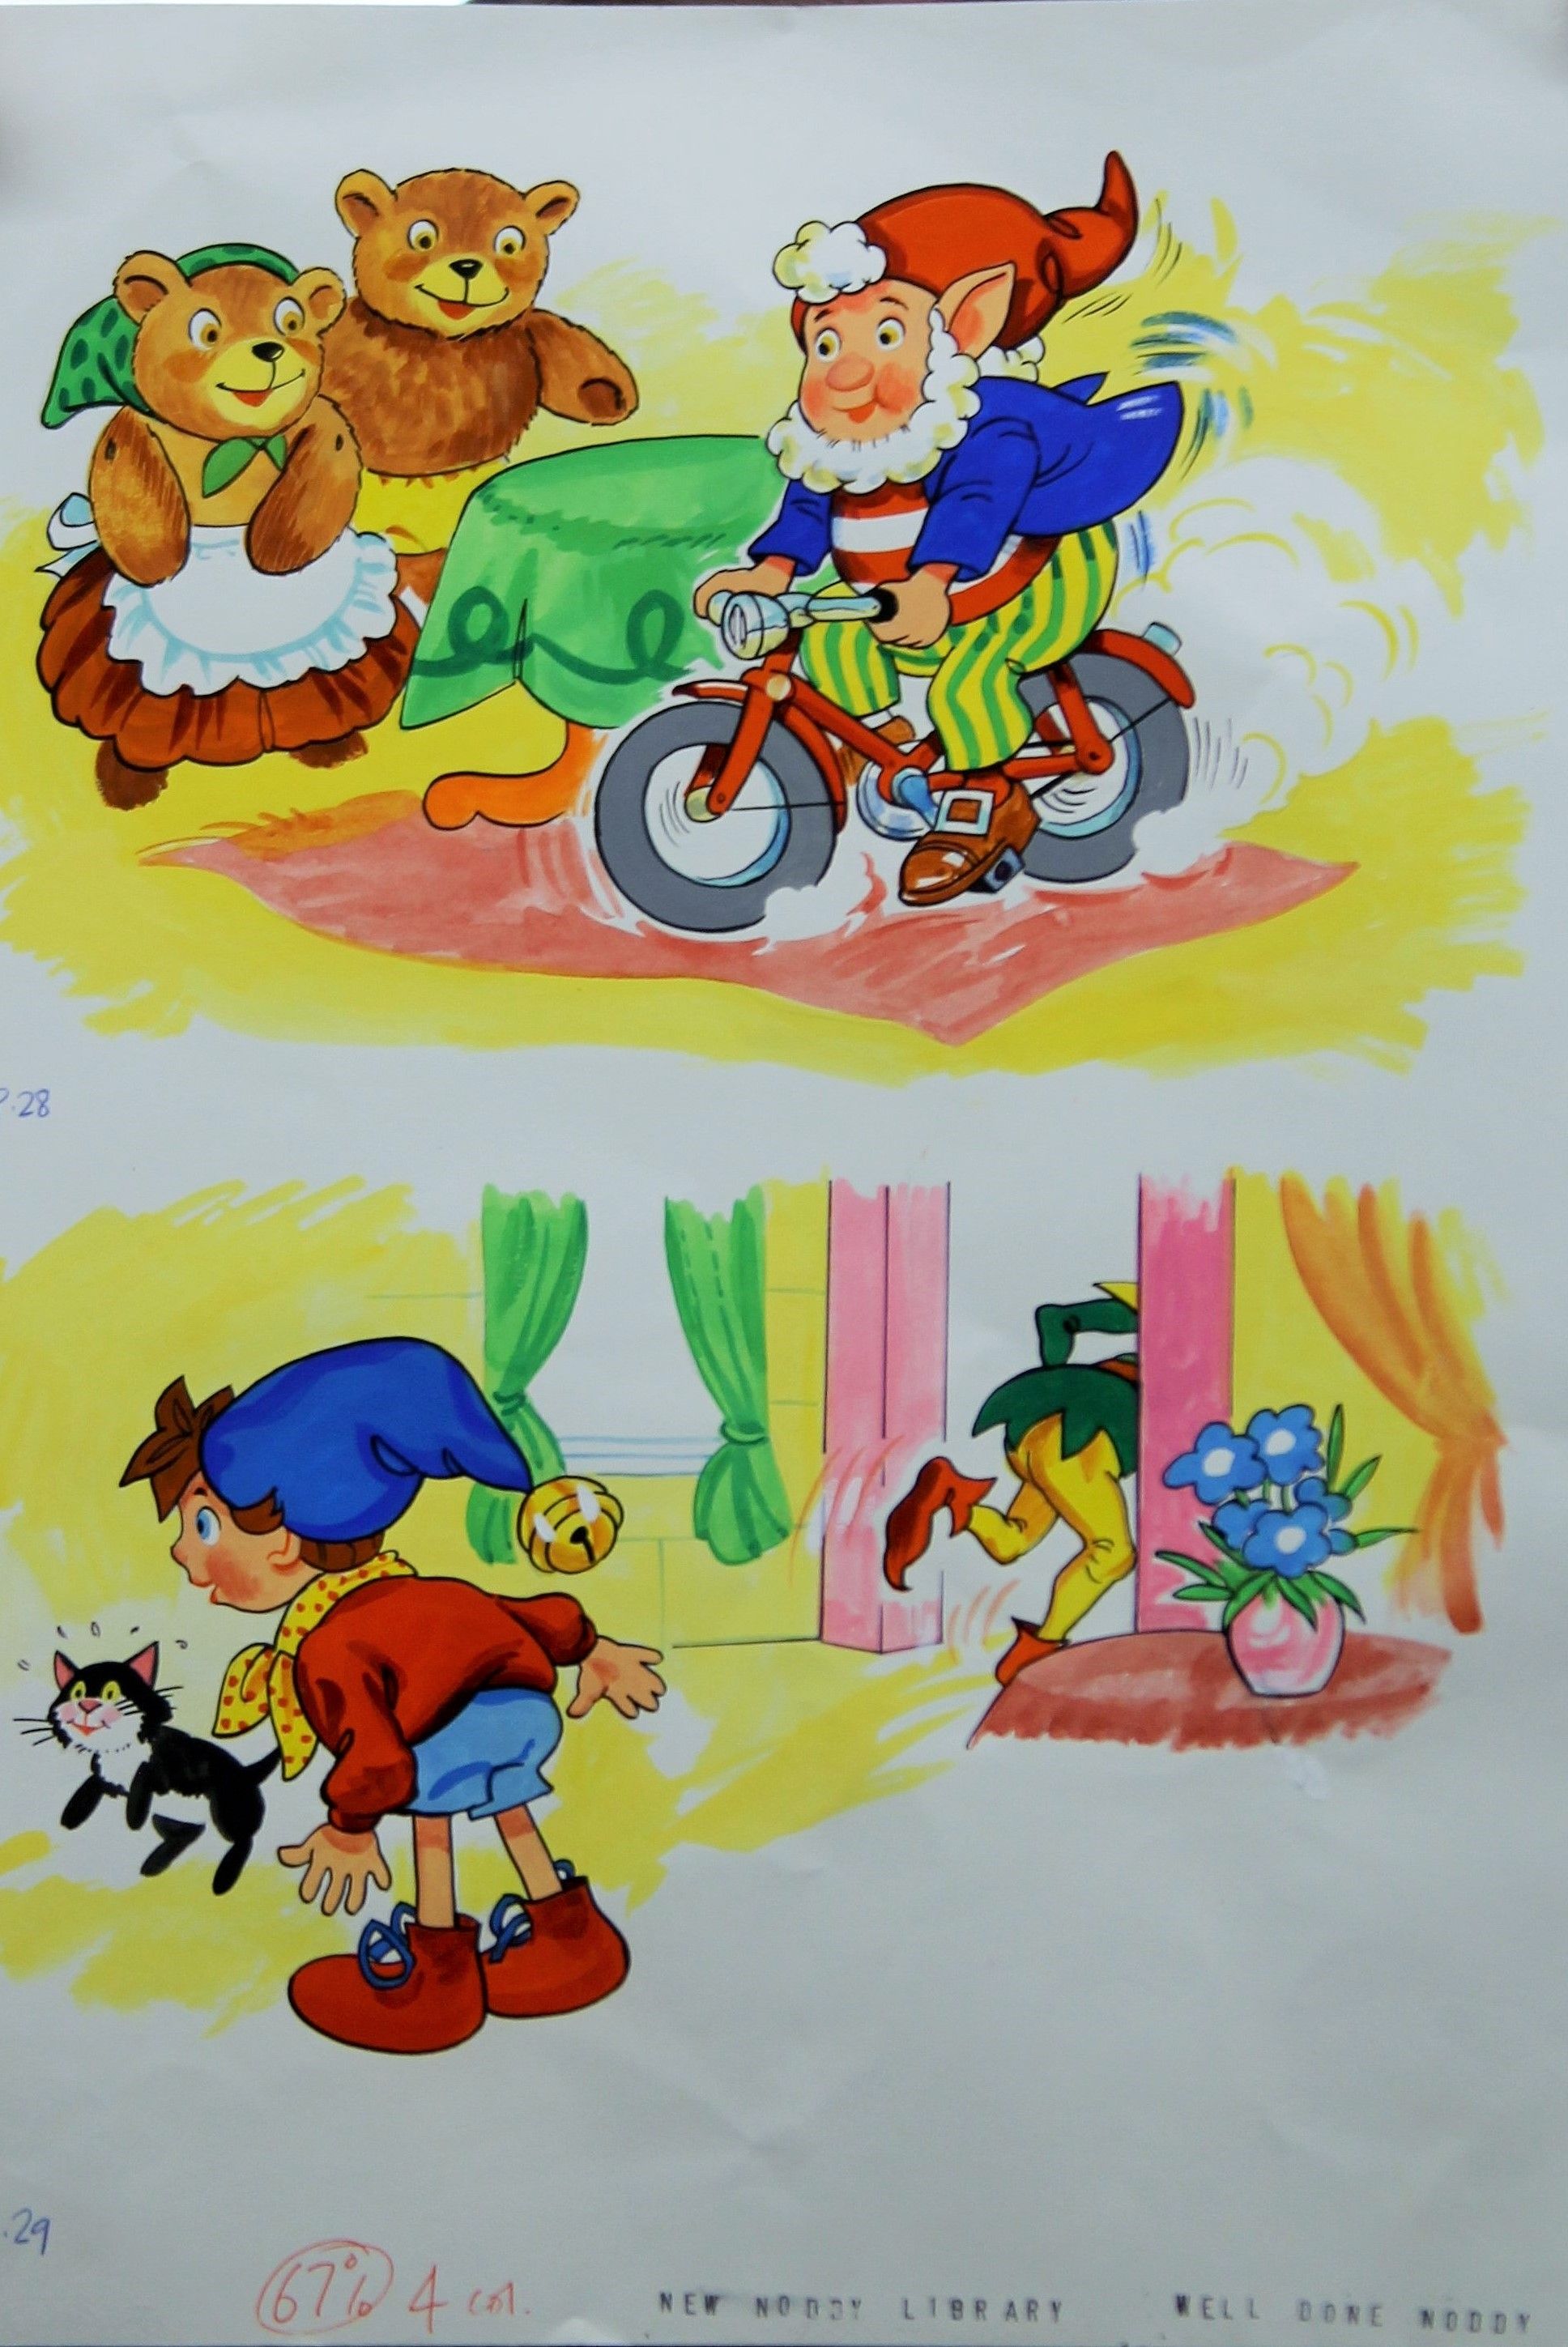 CHRIS COLE, two pages of original artwork for Noddy, acrylic on paper. Each page 27 x 37 cm. - Image 2 of 2